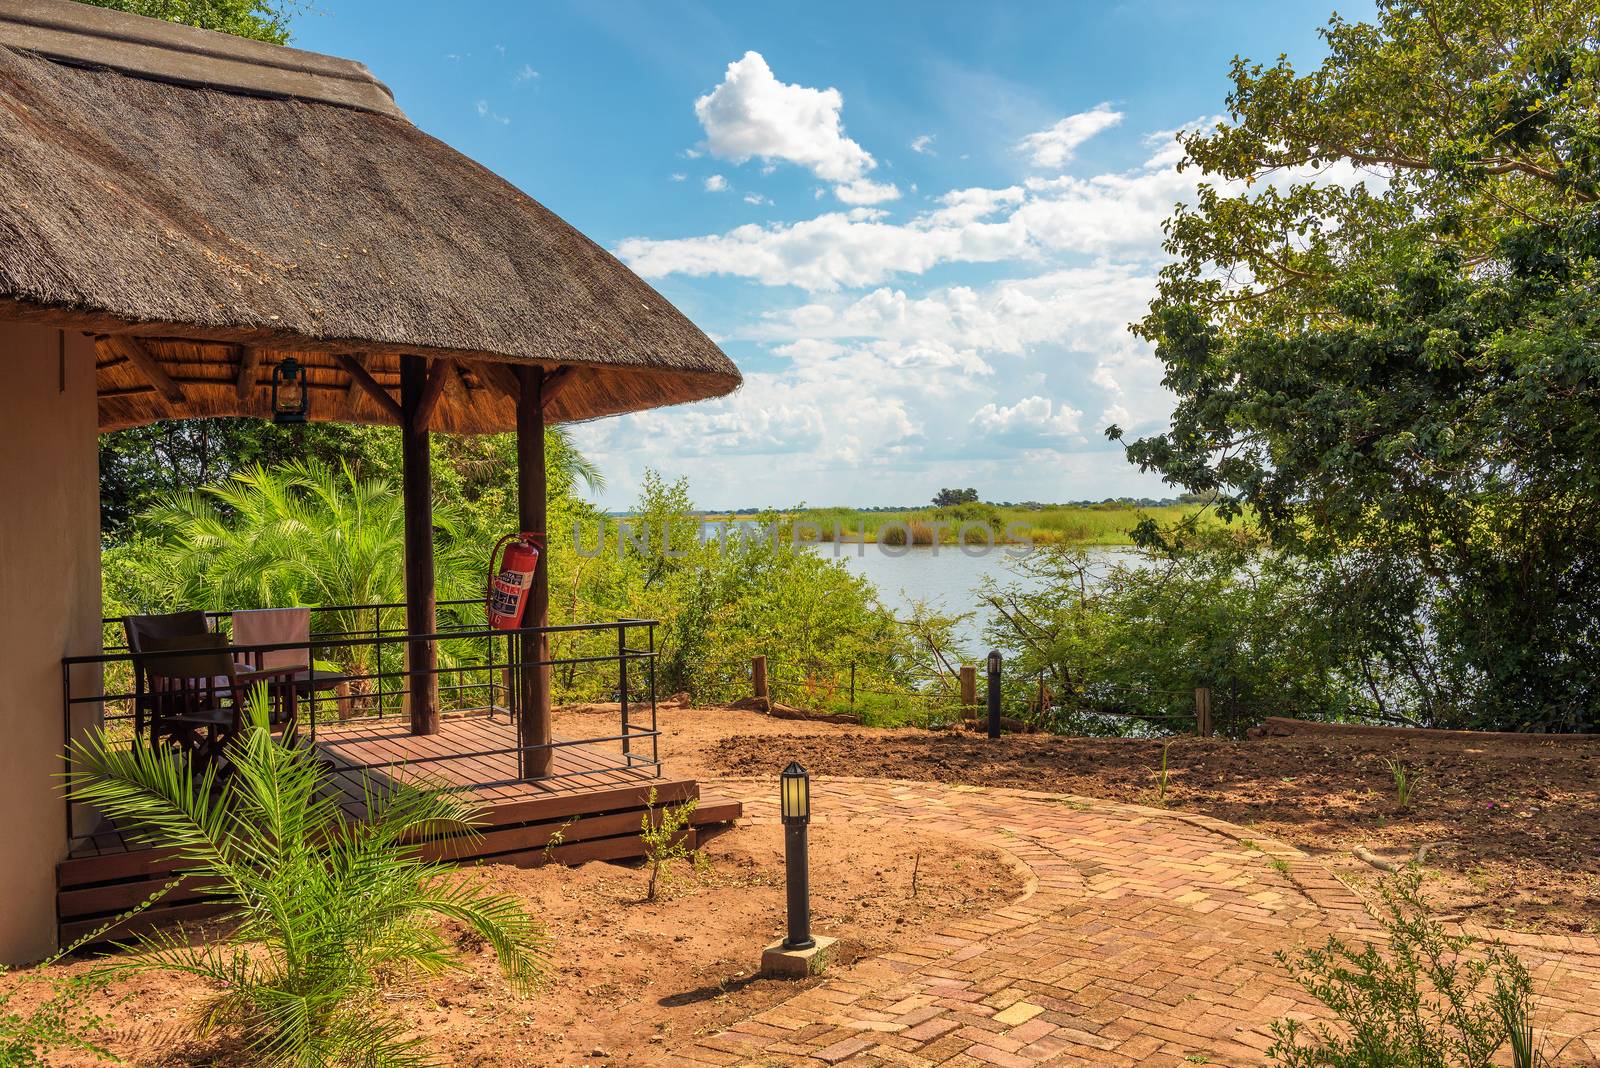 Kasane, Botswana - April 7, 2019 : Chalet at the Chobe Safari Lodge in Kasane. This lodge is situated on the banks of the Chobe River at the border of Chobe National Park.